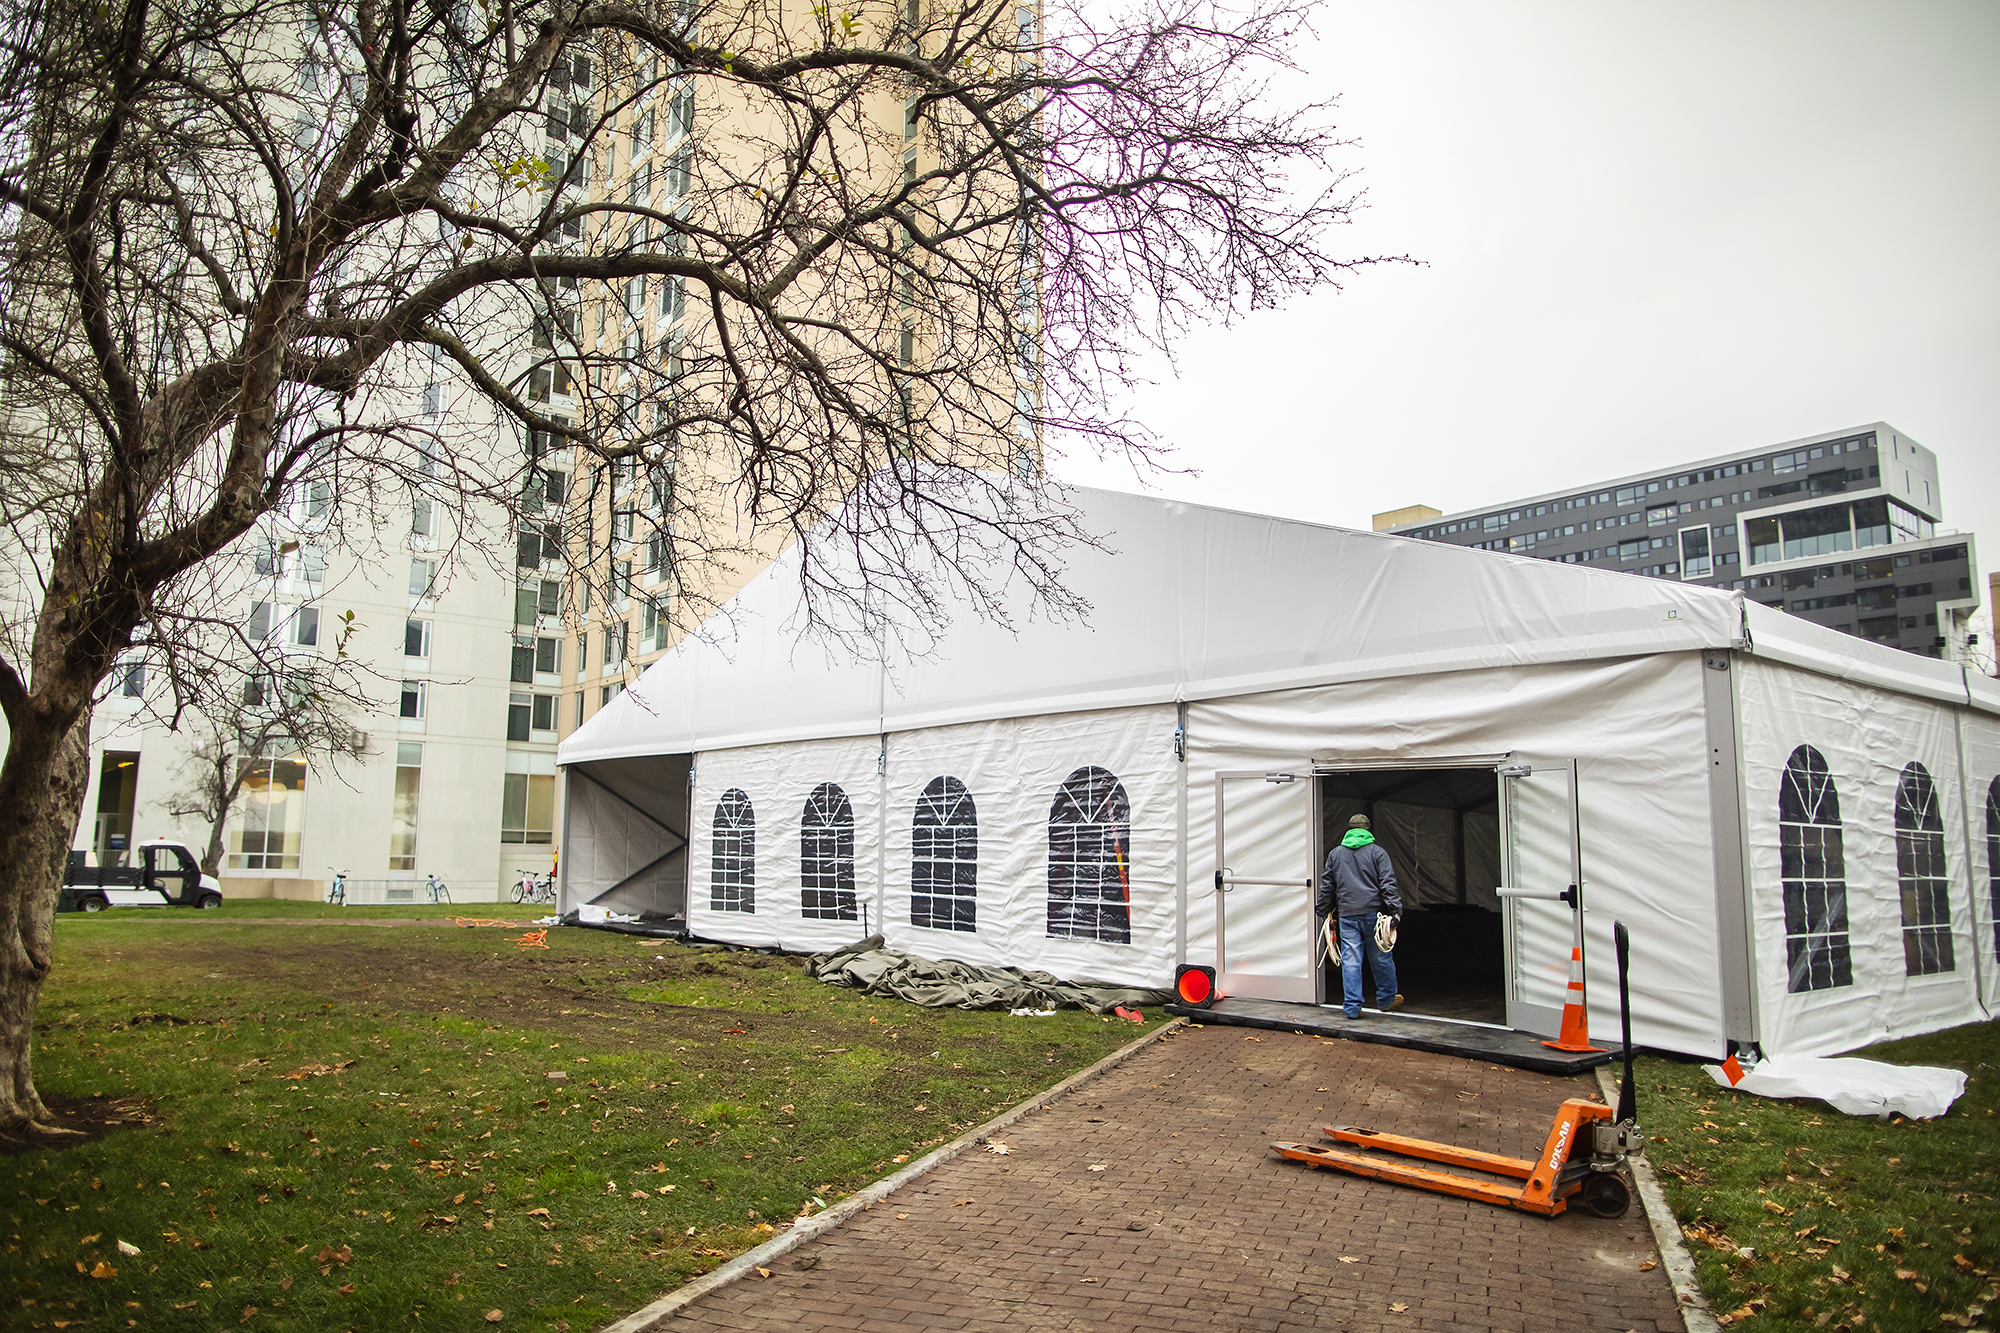 a person walking into a large outdoor tent